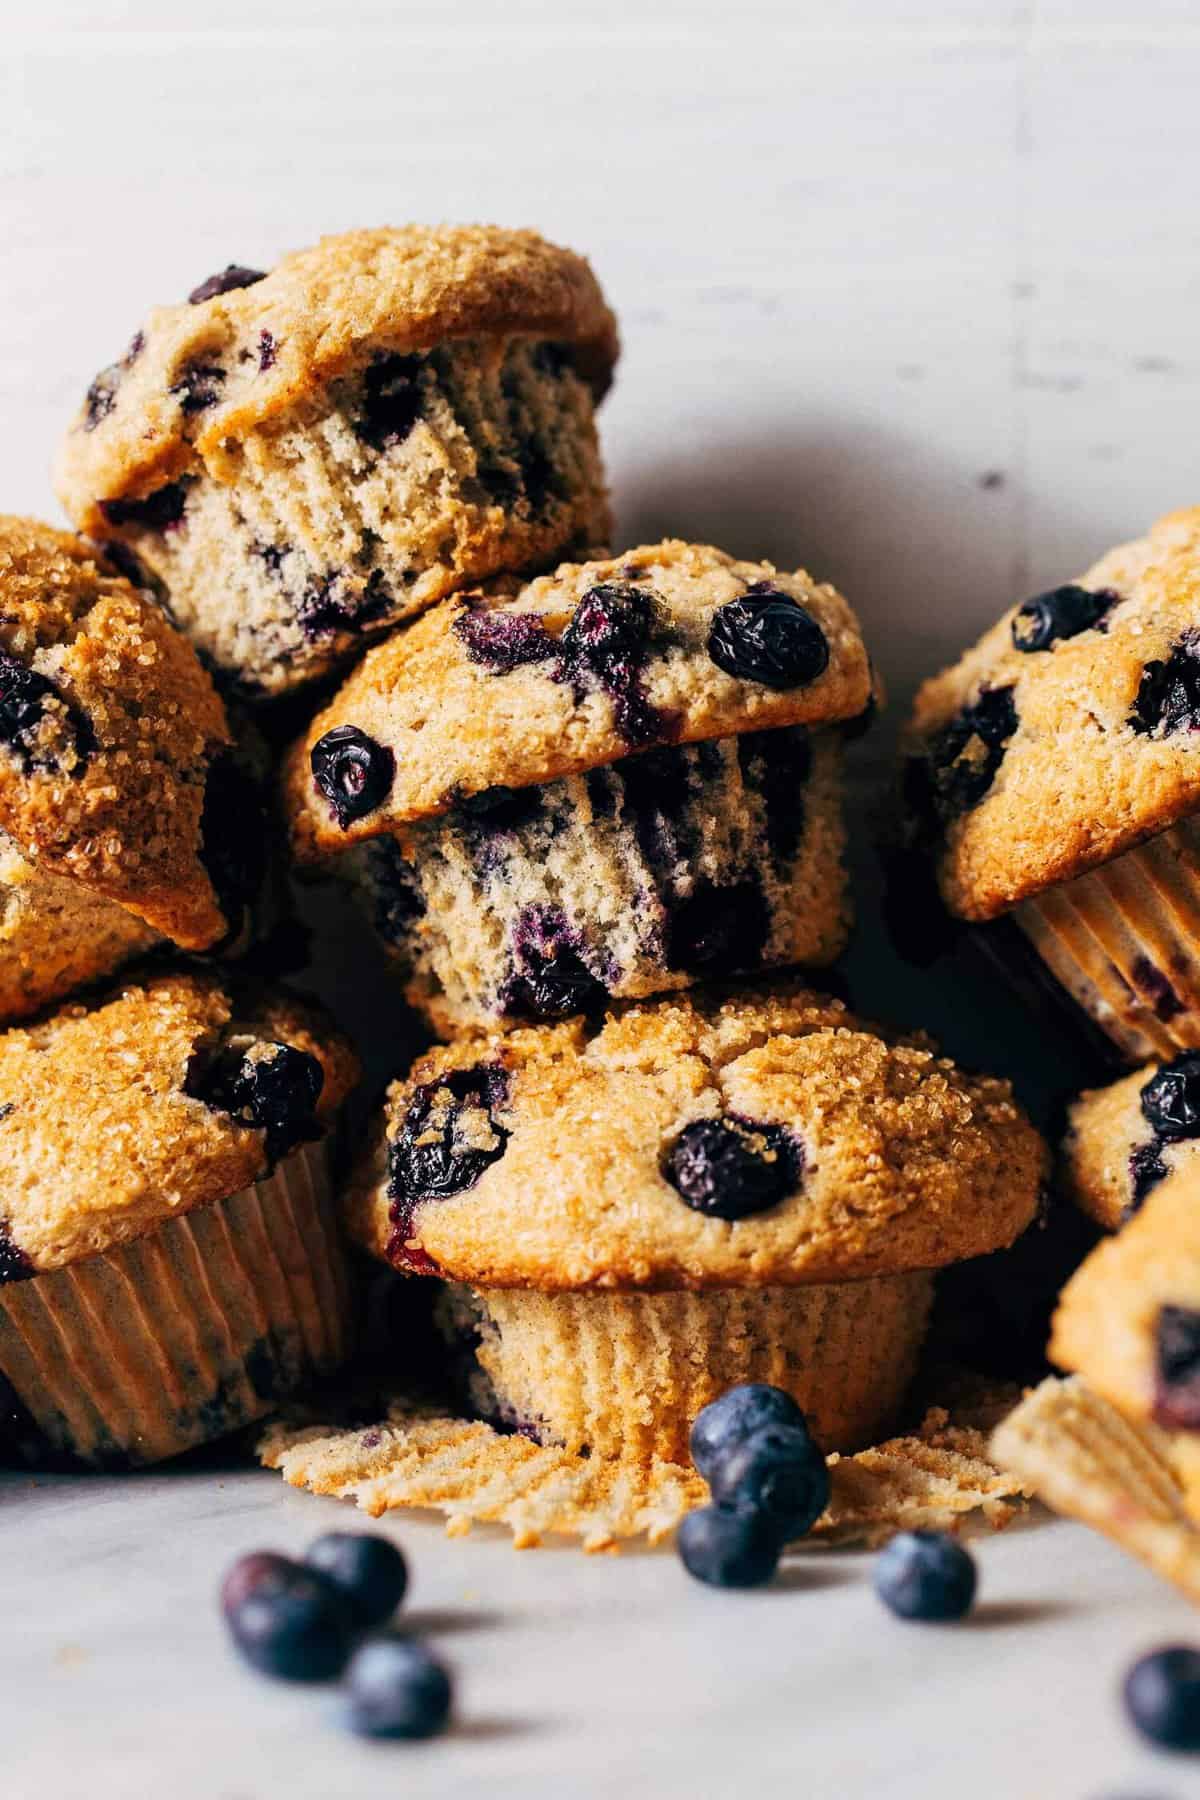 The Best Muffin Pan Will Change Your Muffin-Baking Life